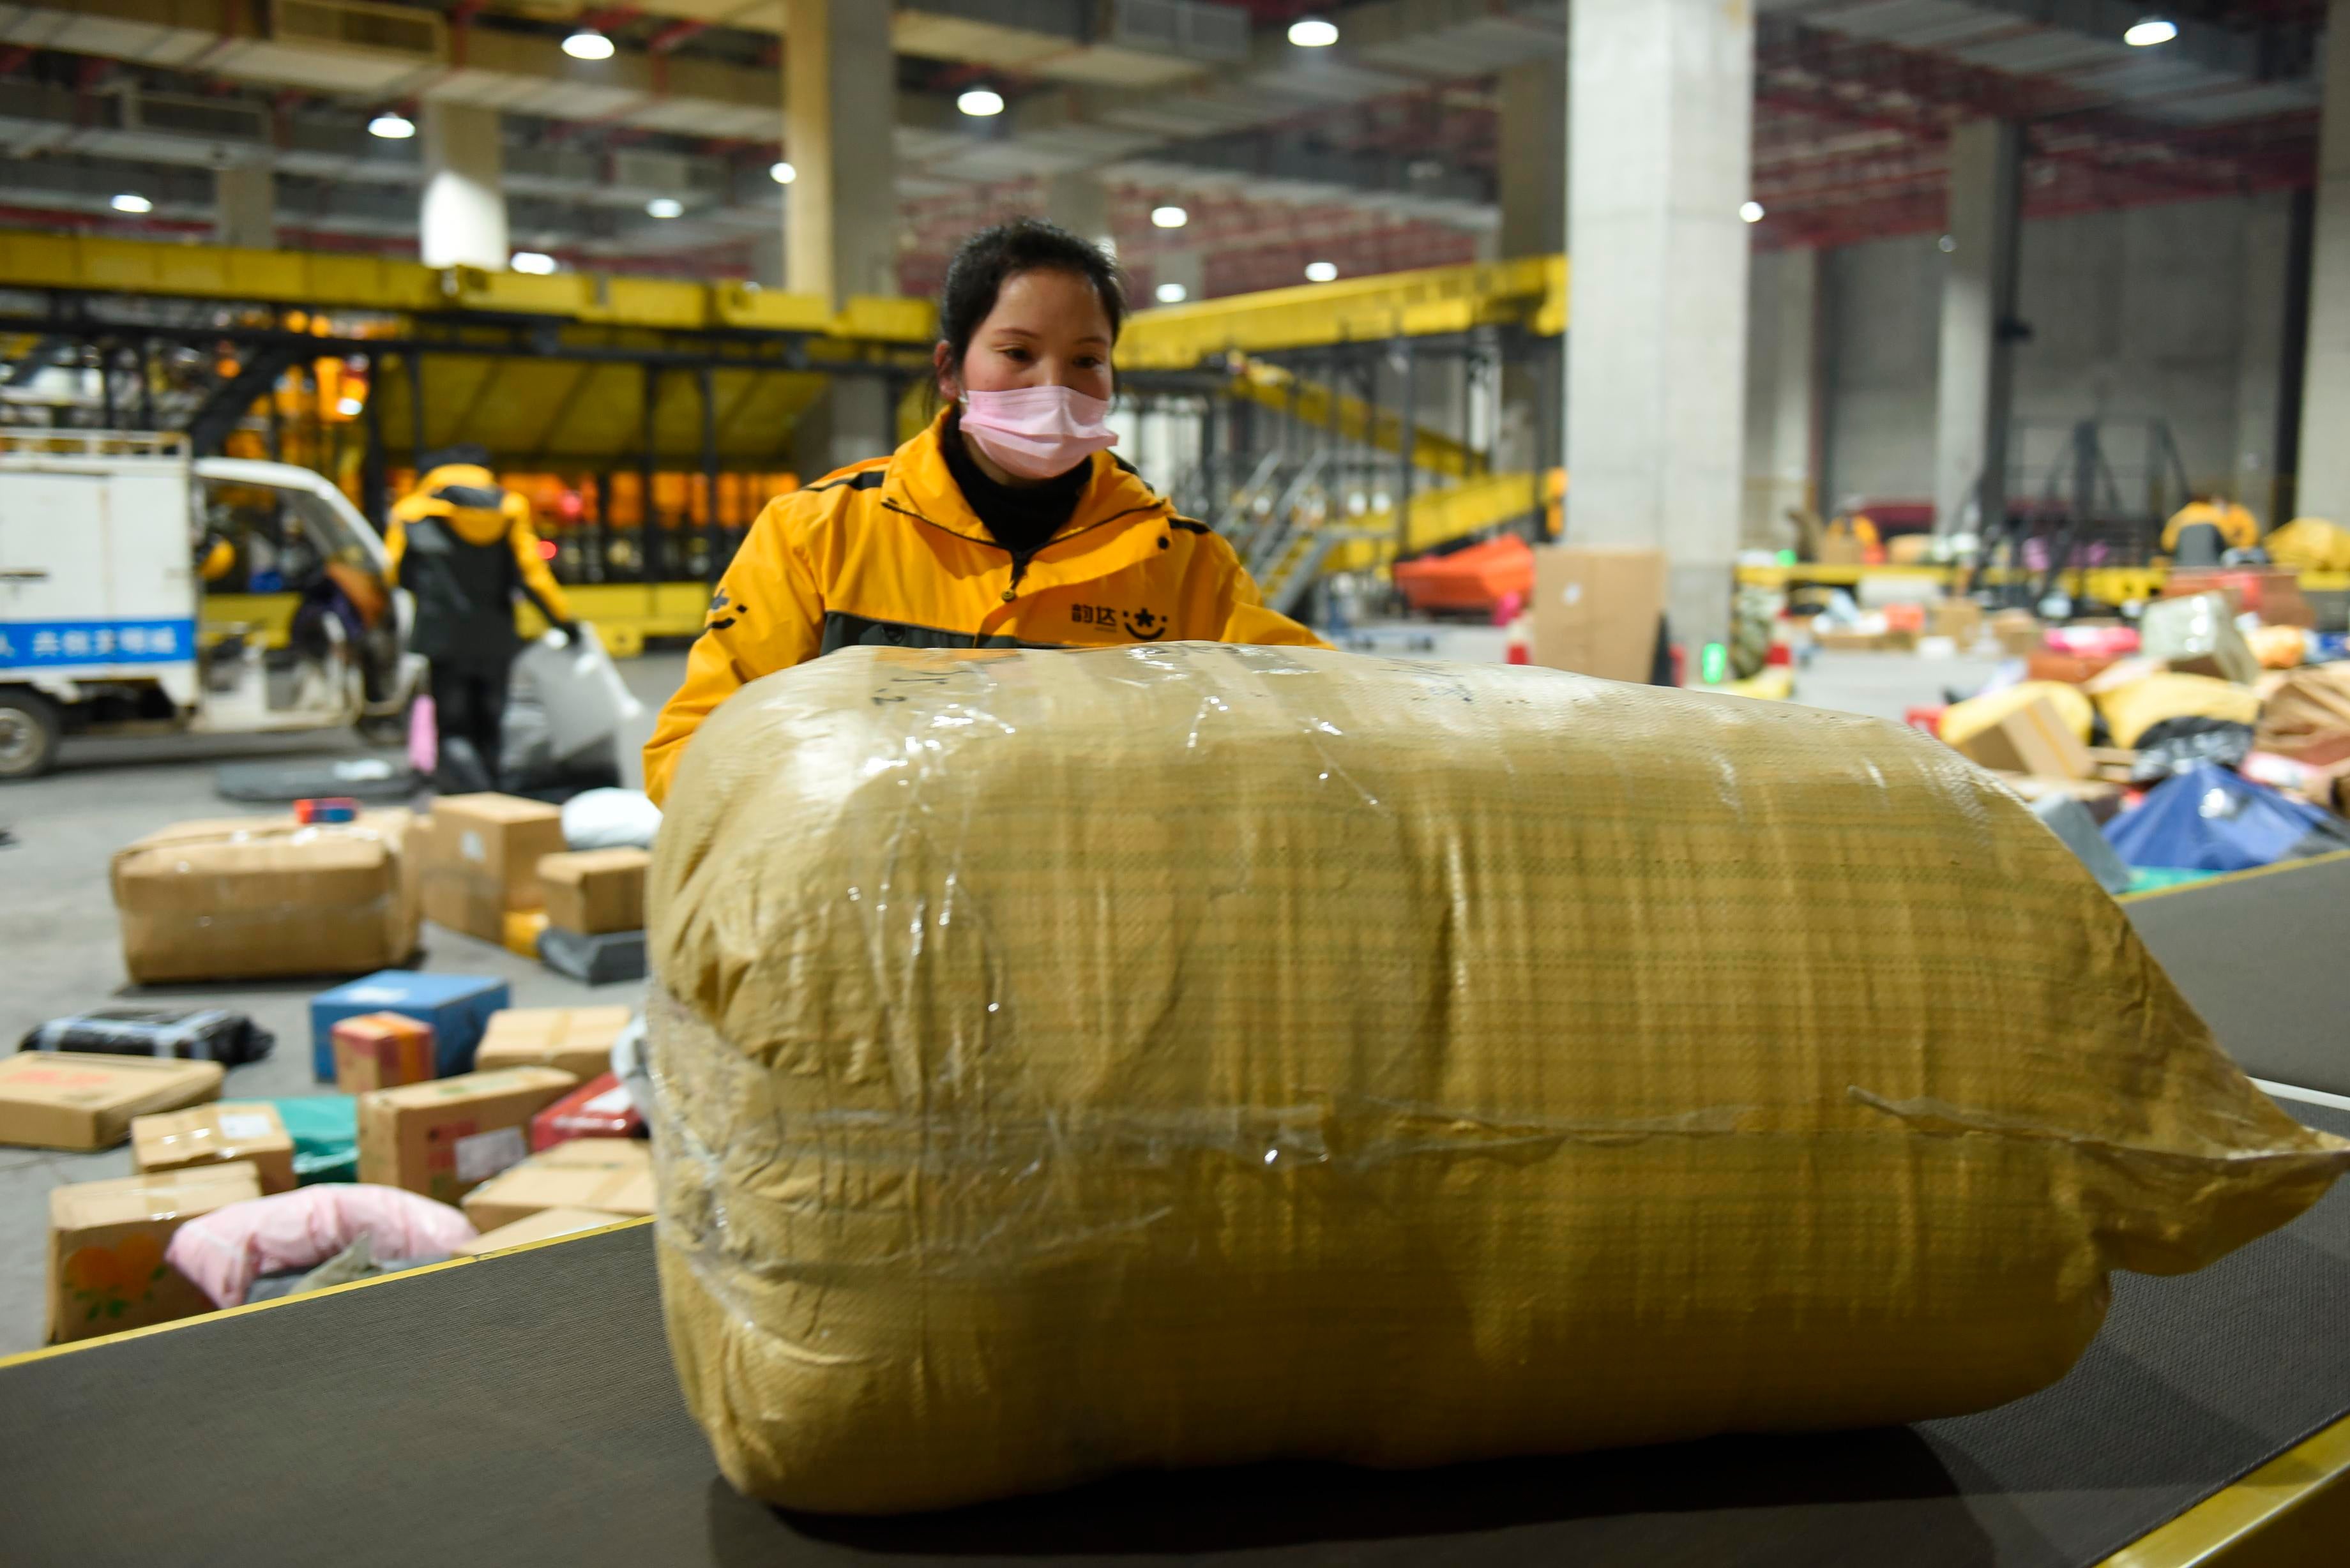 As the Double 12 shopping carnival is coming, workers are busy sorting  express packages on the assembly line in the E-commerce Logistics  Industrial Park of Donghai County, Lianyungang City, east China's  Jiangsu Province, December 7, 2022. (Photo: Imaginechina, AP)